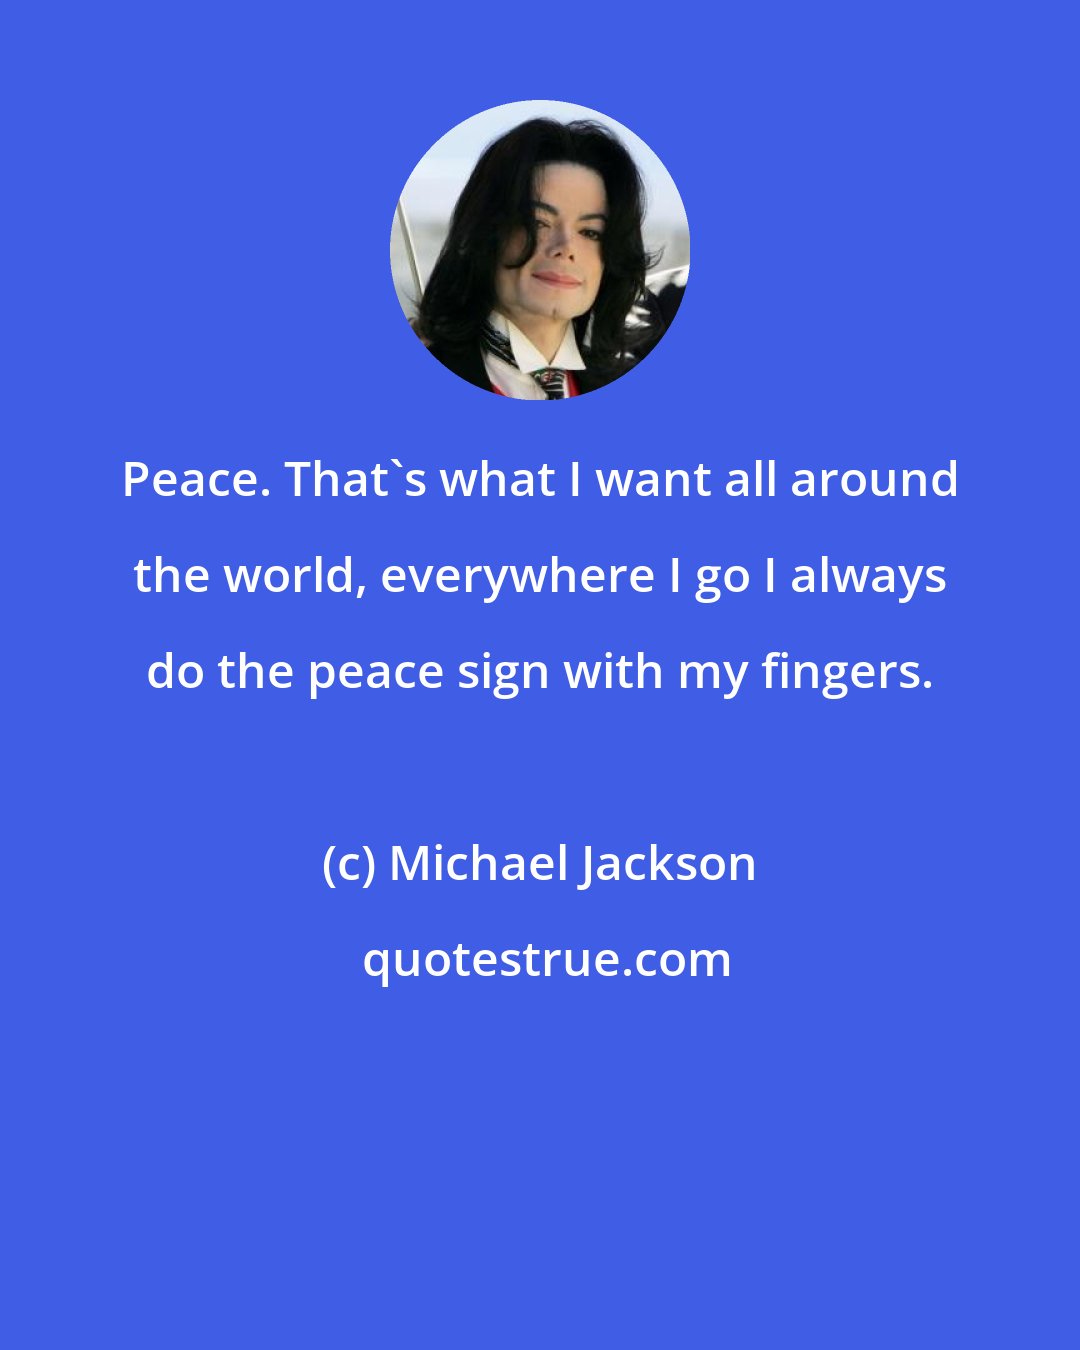 Michael Jackson: Peace. That's what I want all around the world, everywhere I go I always do the peace sign with my fingers.